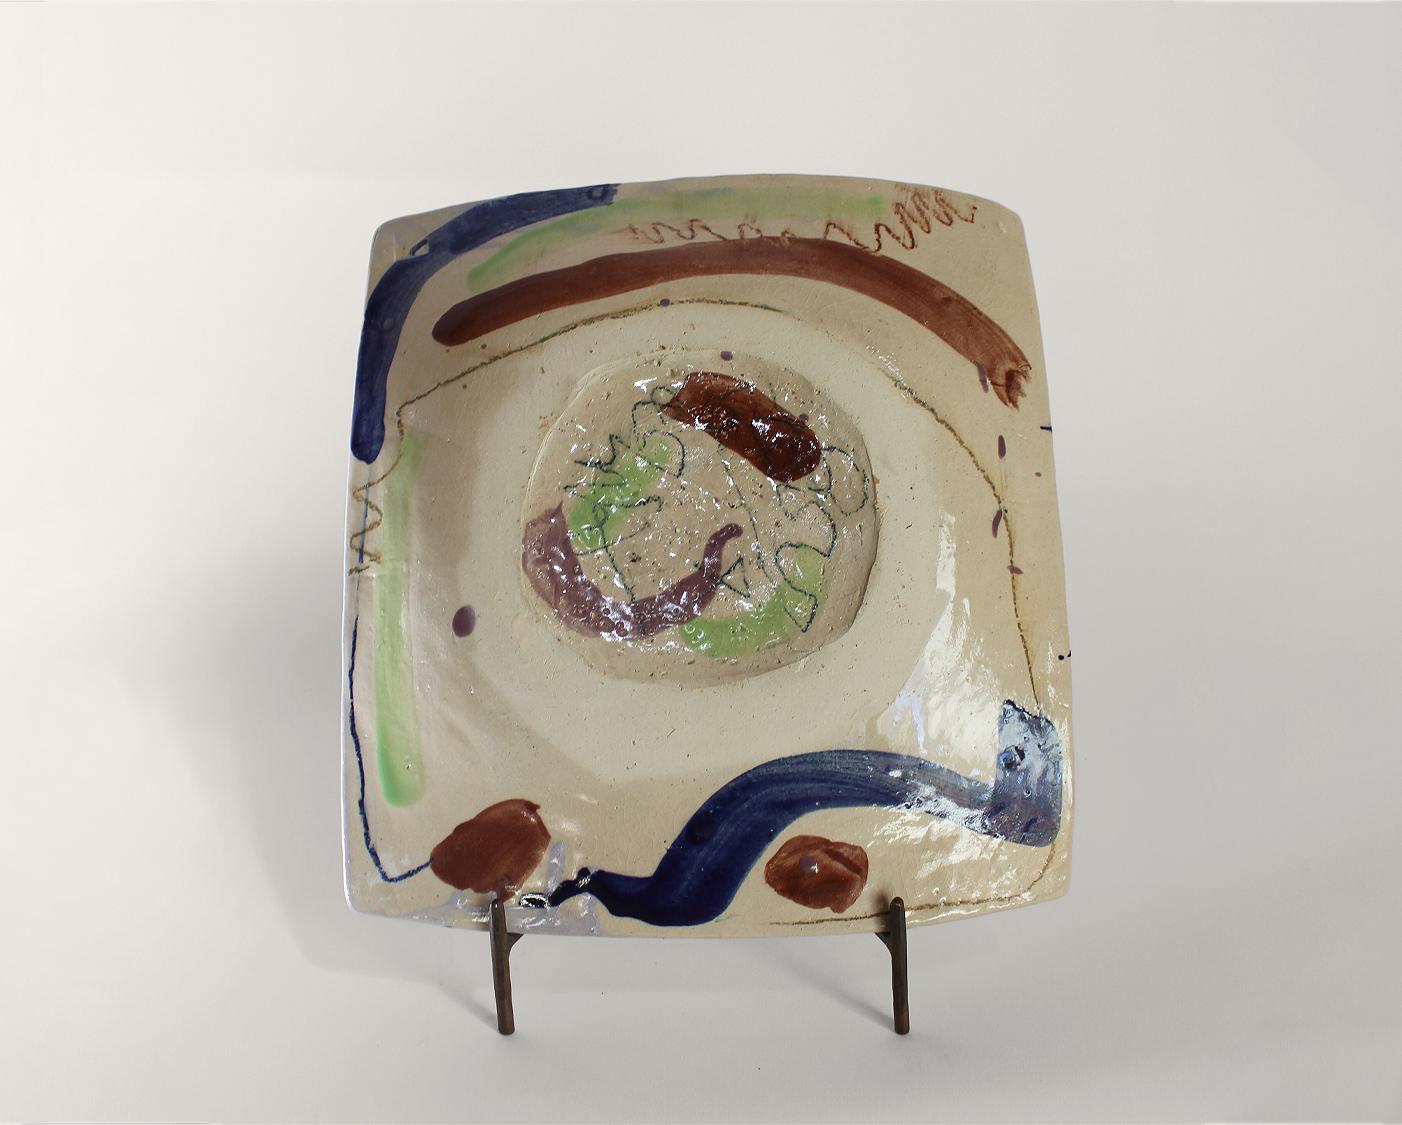 Terre sonore - Shun Kadohashi 

Colorful free square Japanese ceramic plate

27 x 30 x 5 cm
Sandstone
Made in Japan
Unique piece
2023

This work comes with a certificate of authenticity.

Shun Kadohashi is a Japanese ceramic artist who lives and